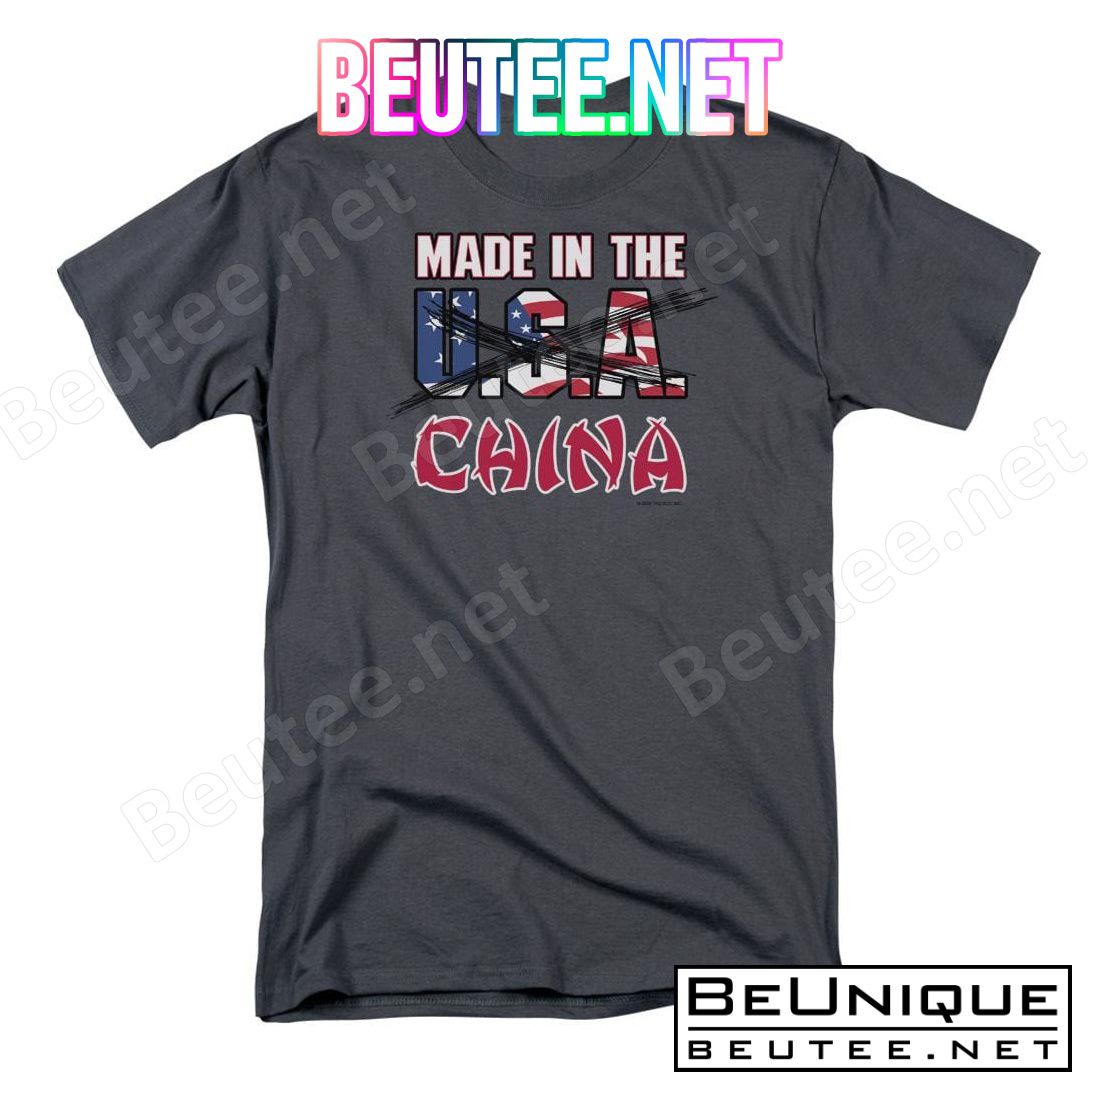 Made In China Not USA T-shirt